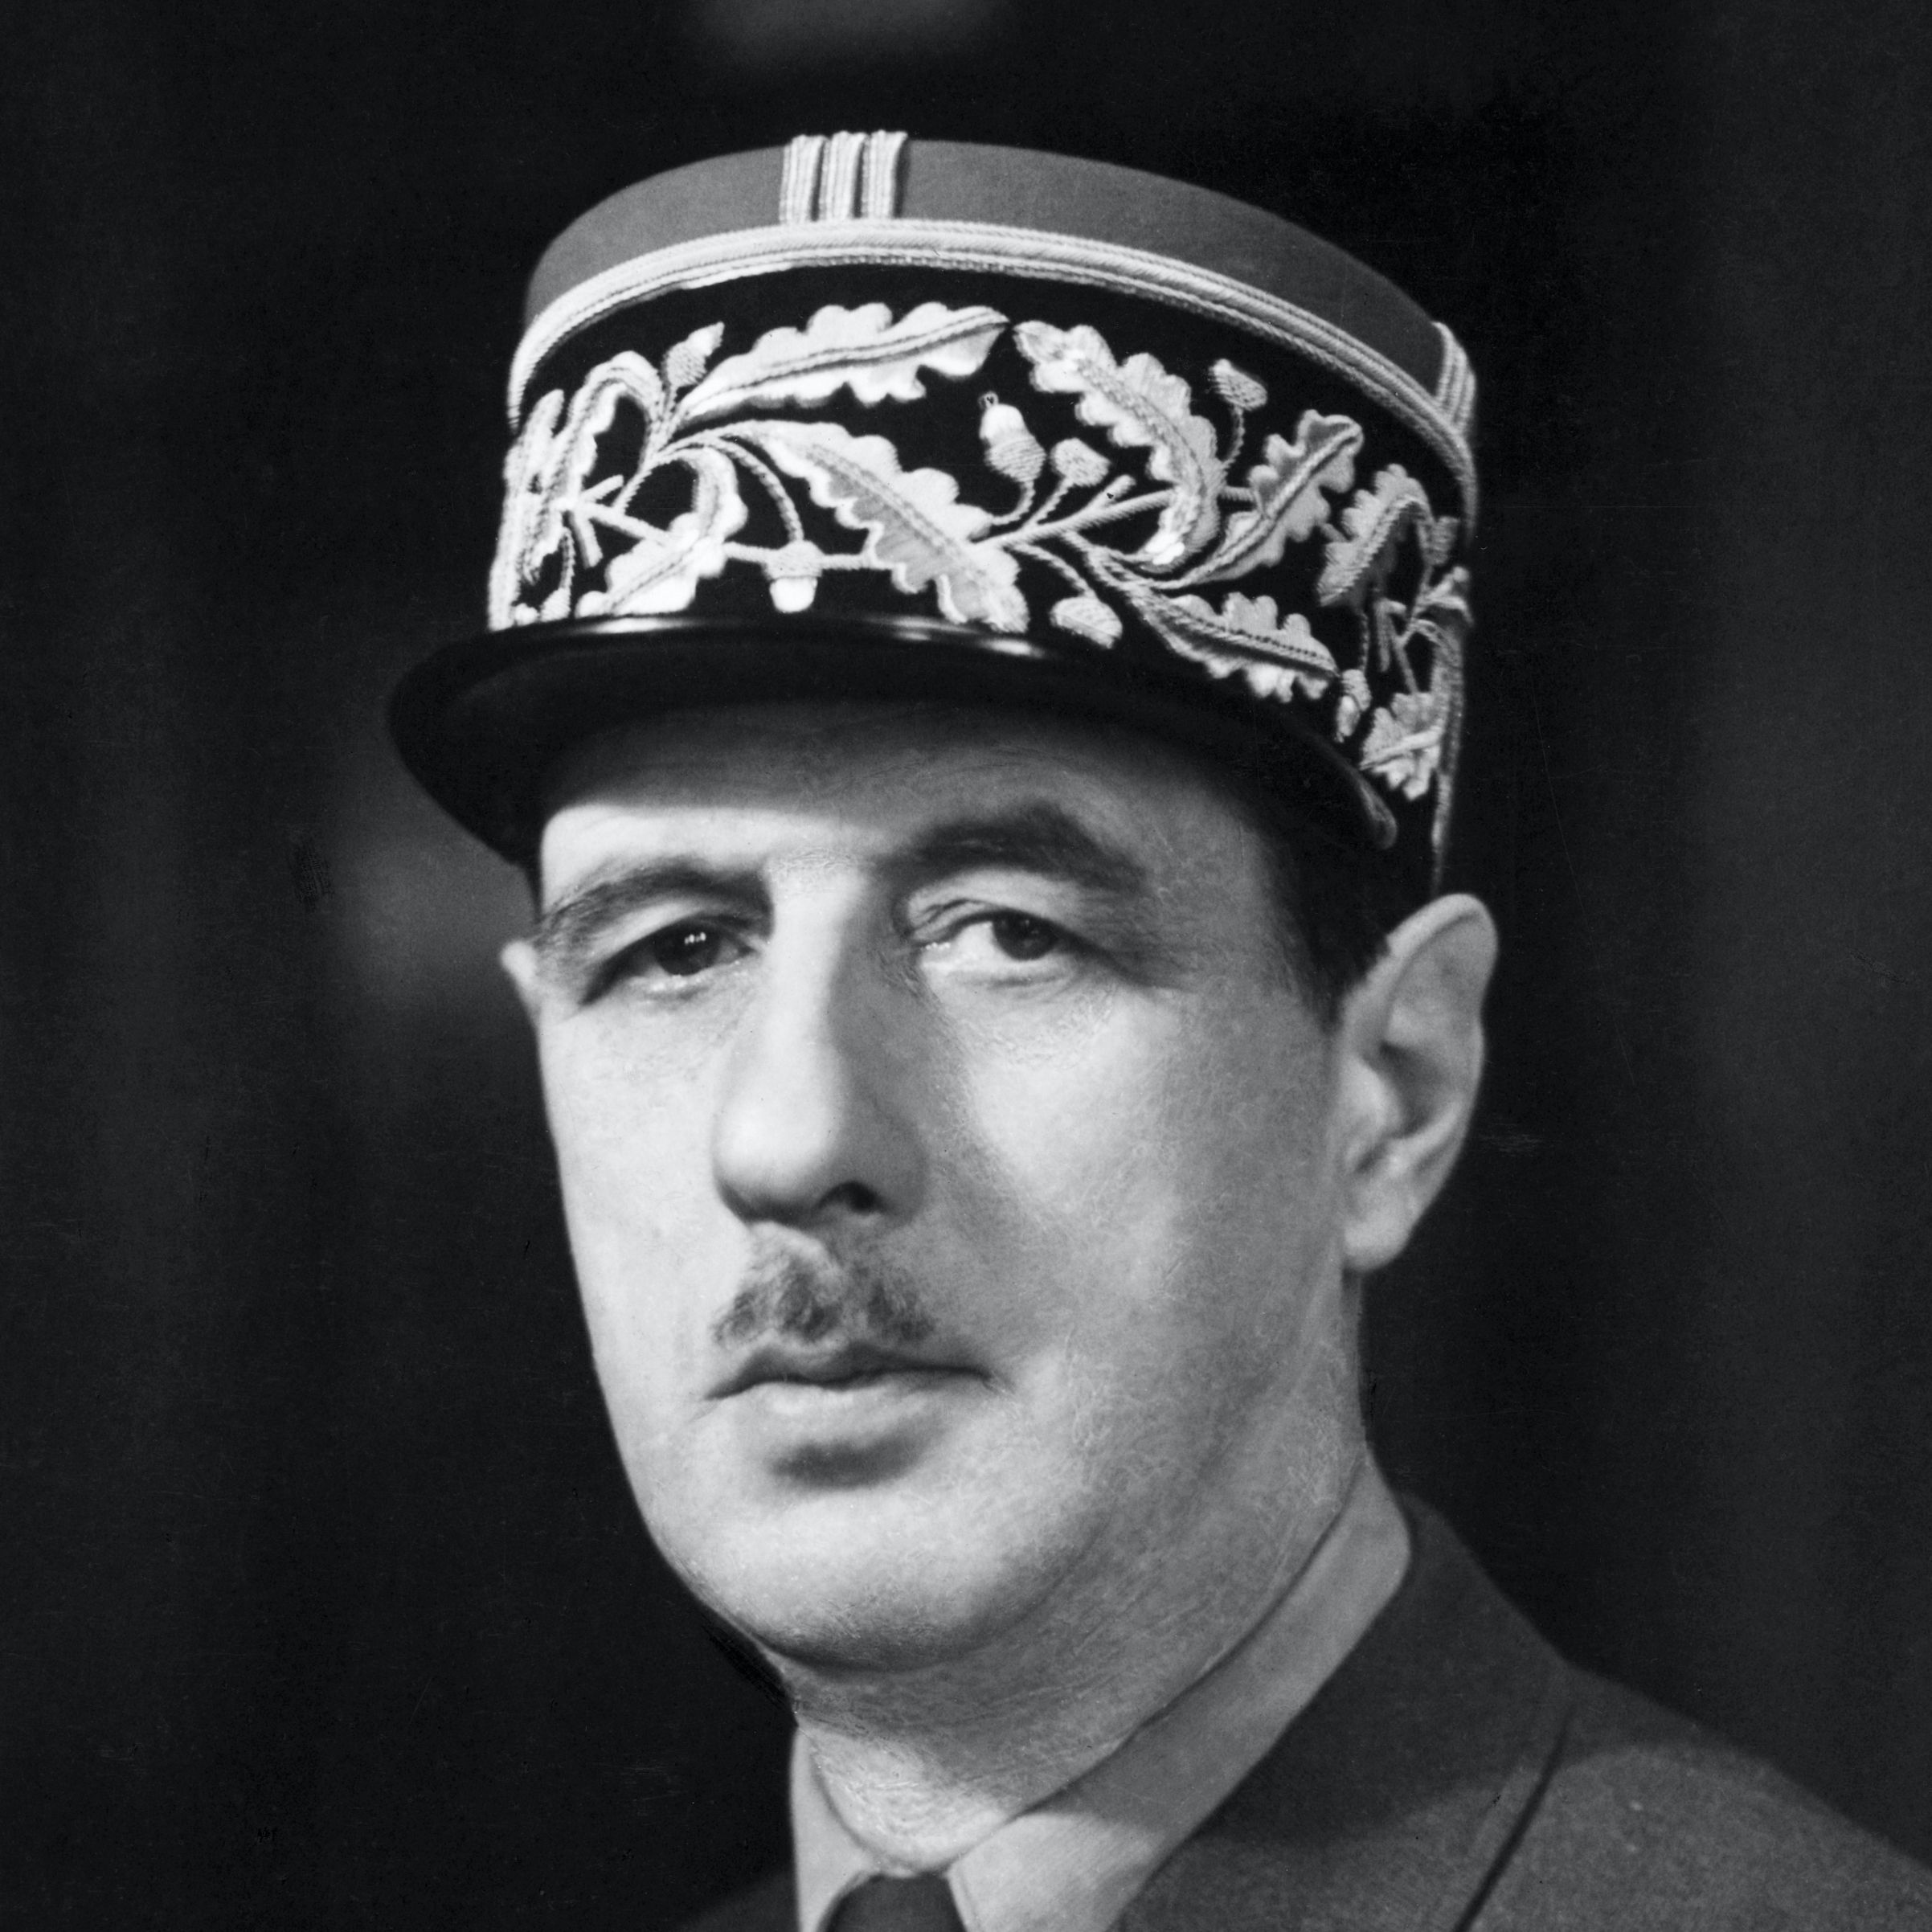 Charles de Gaulle - Quotes, Facts & Presidency